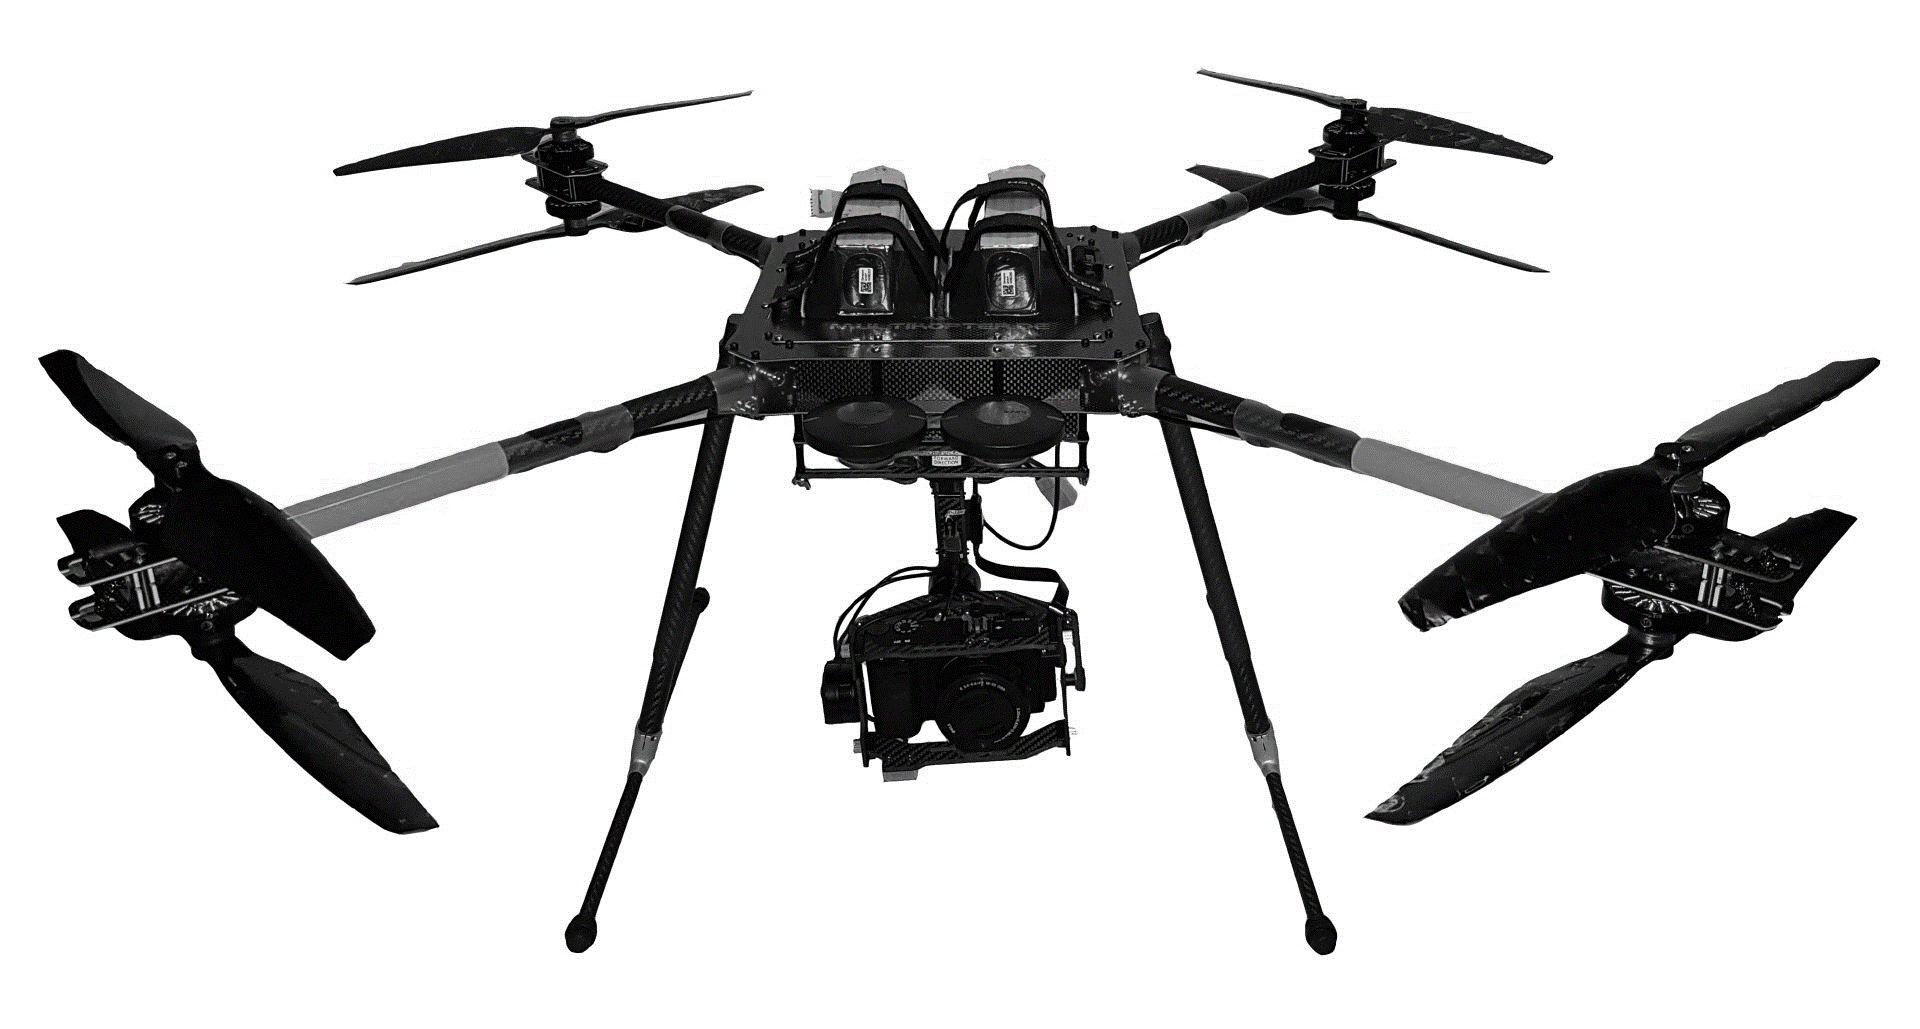 UAV (unmanned aerial vehicle) with camera